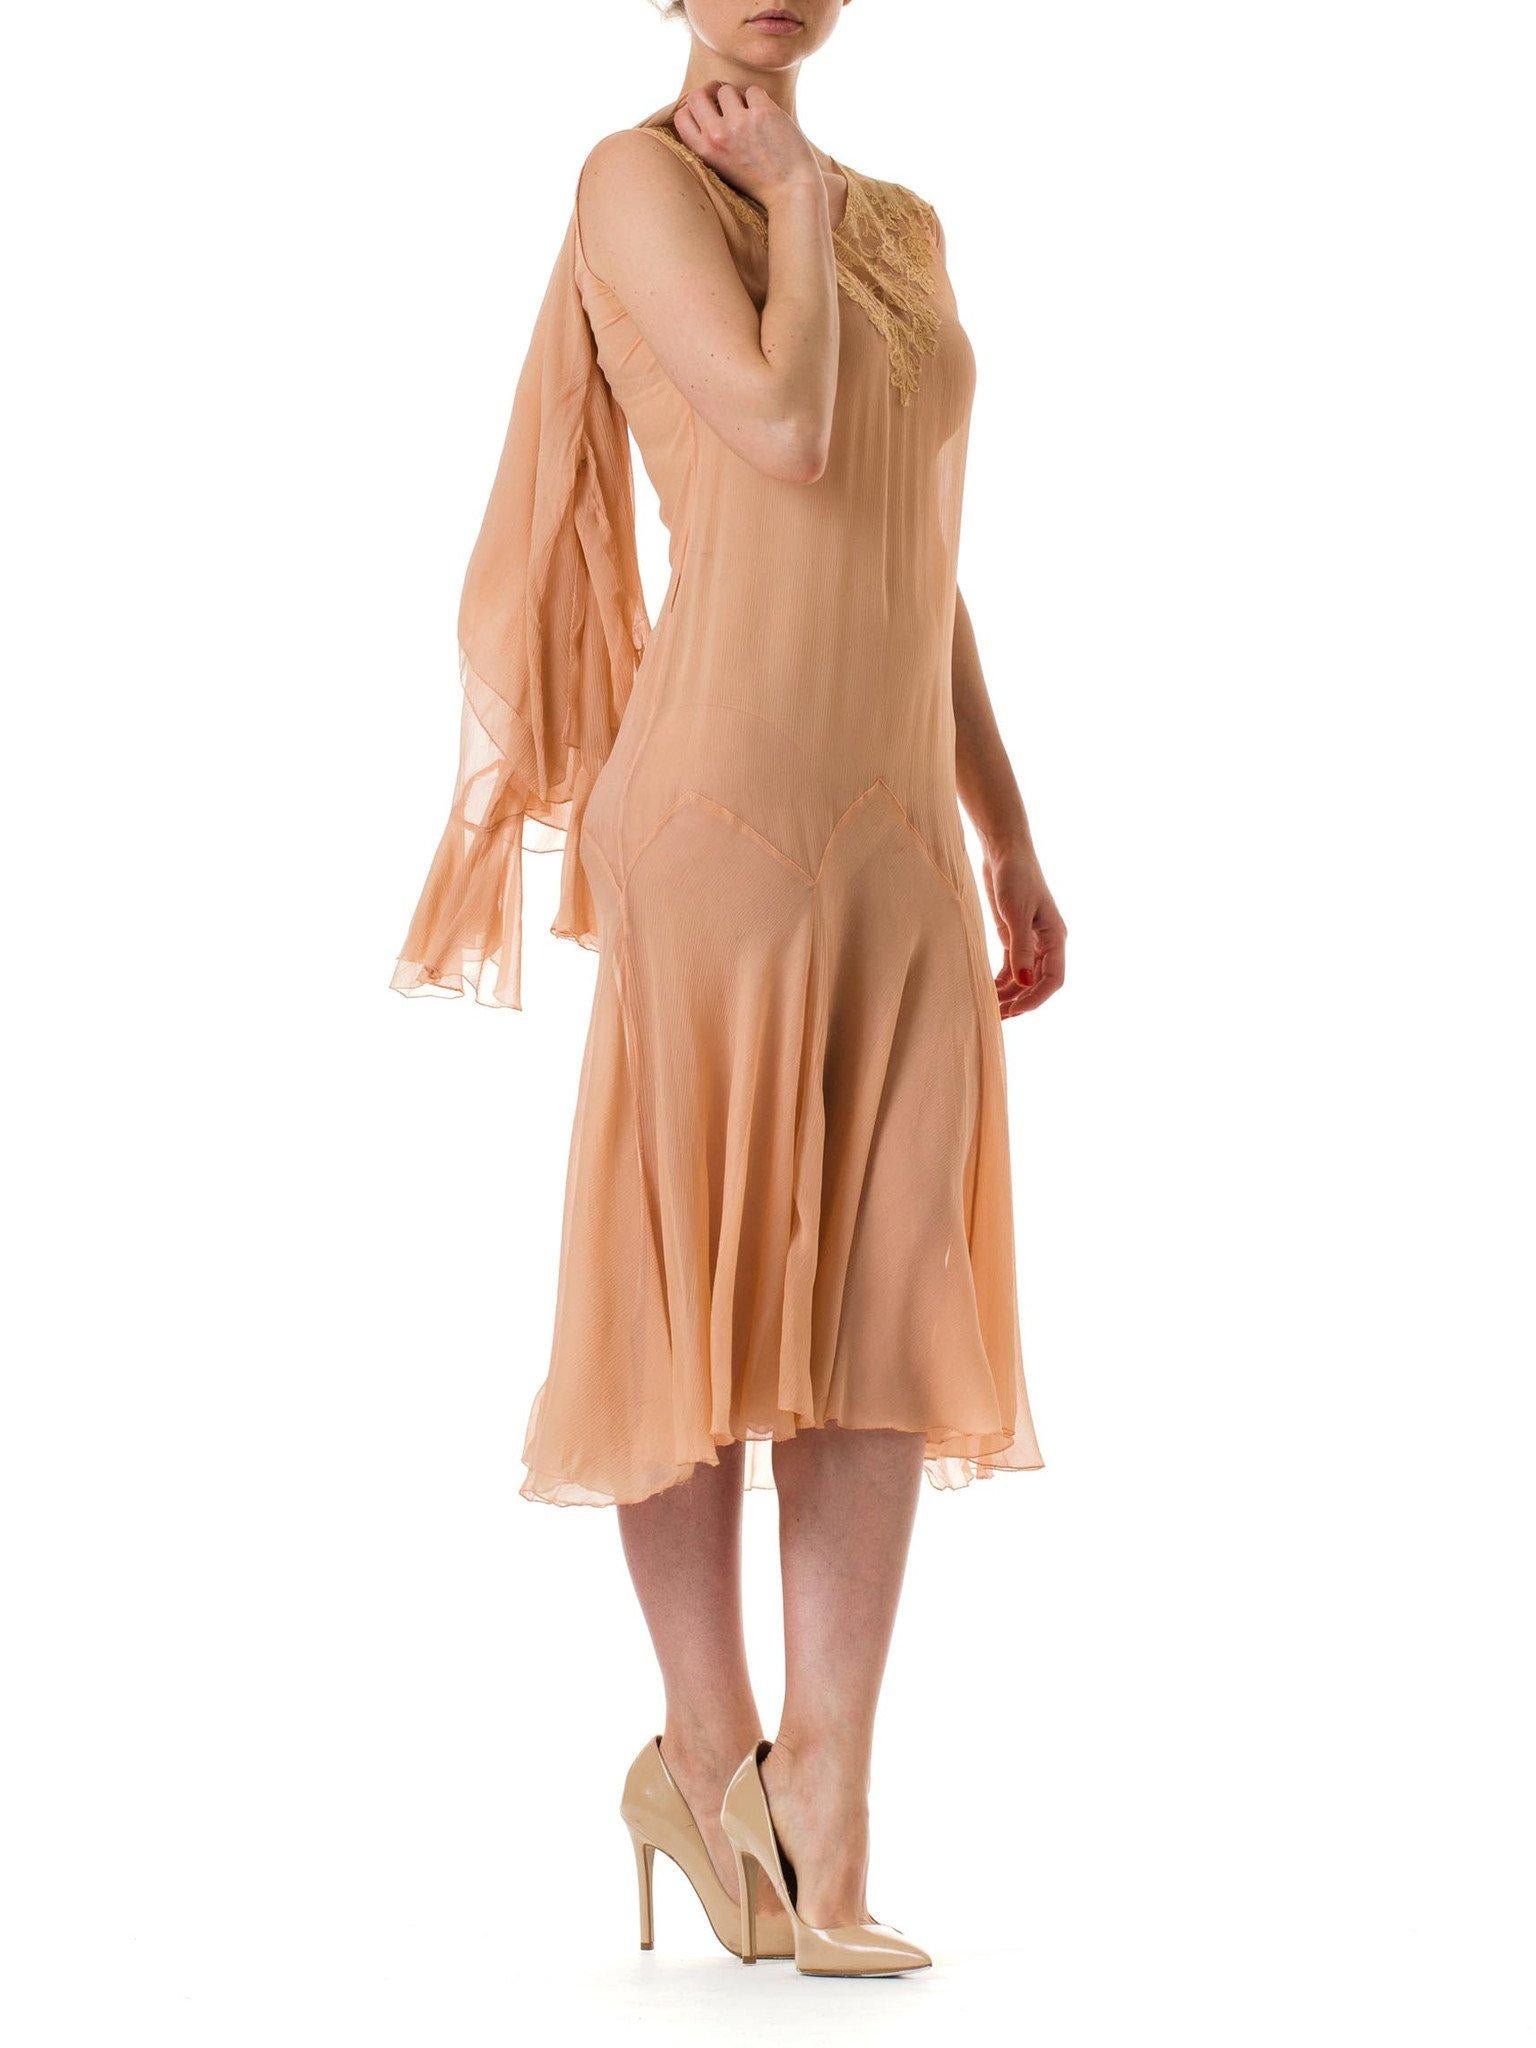 Women's 1920S Blush Pink Silk Chiffon & Lace Sheer Dress With Jacket For Sale